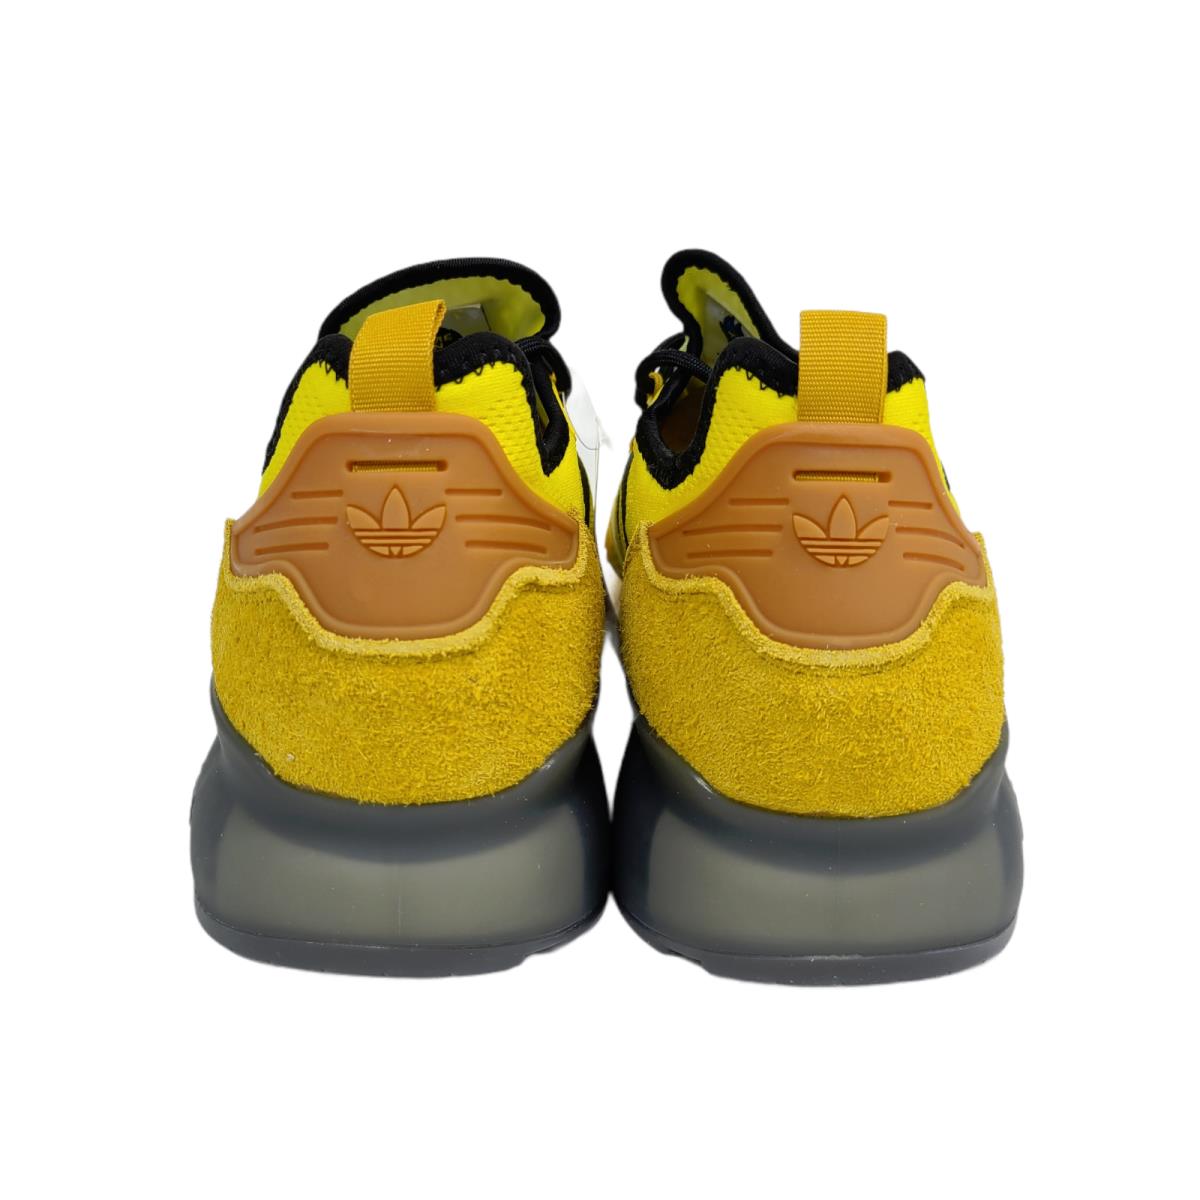 Adidas shoes Boost - Yellow 12